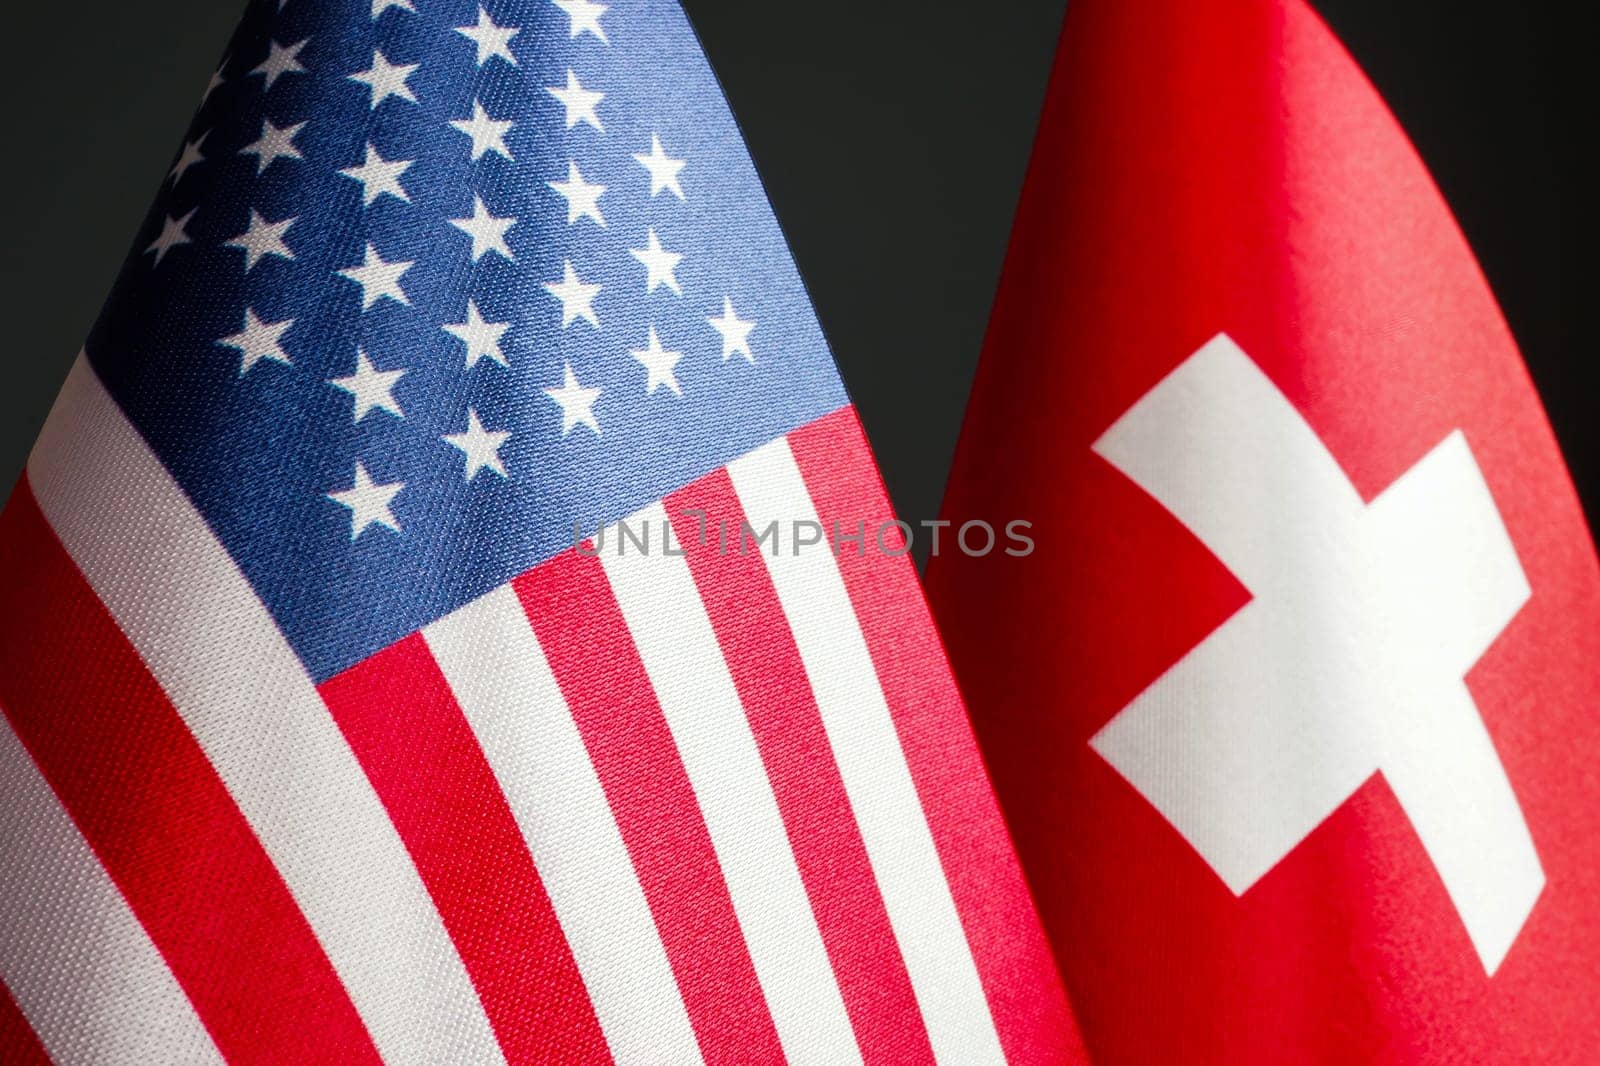 Nearby are the small flags of the USA and Switzerland.